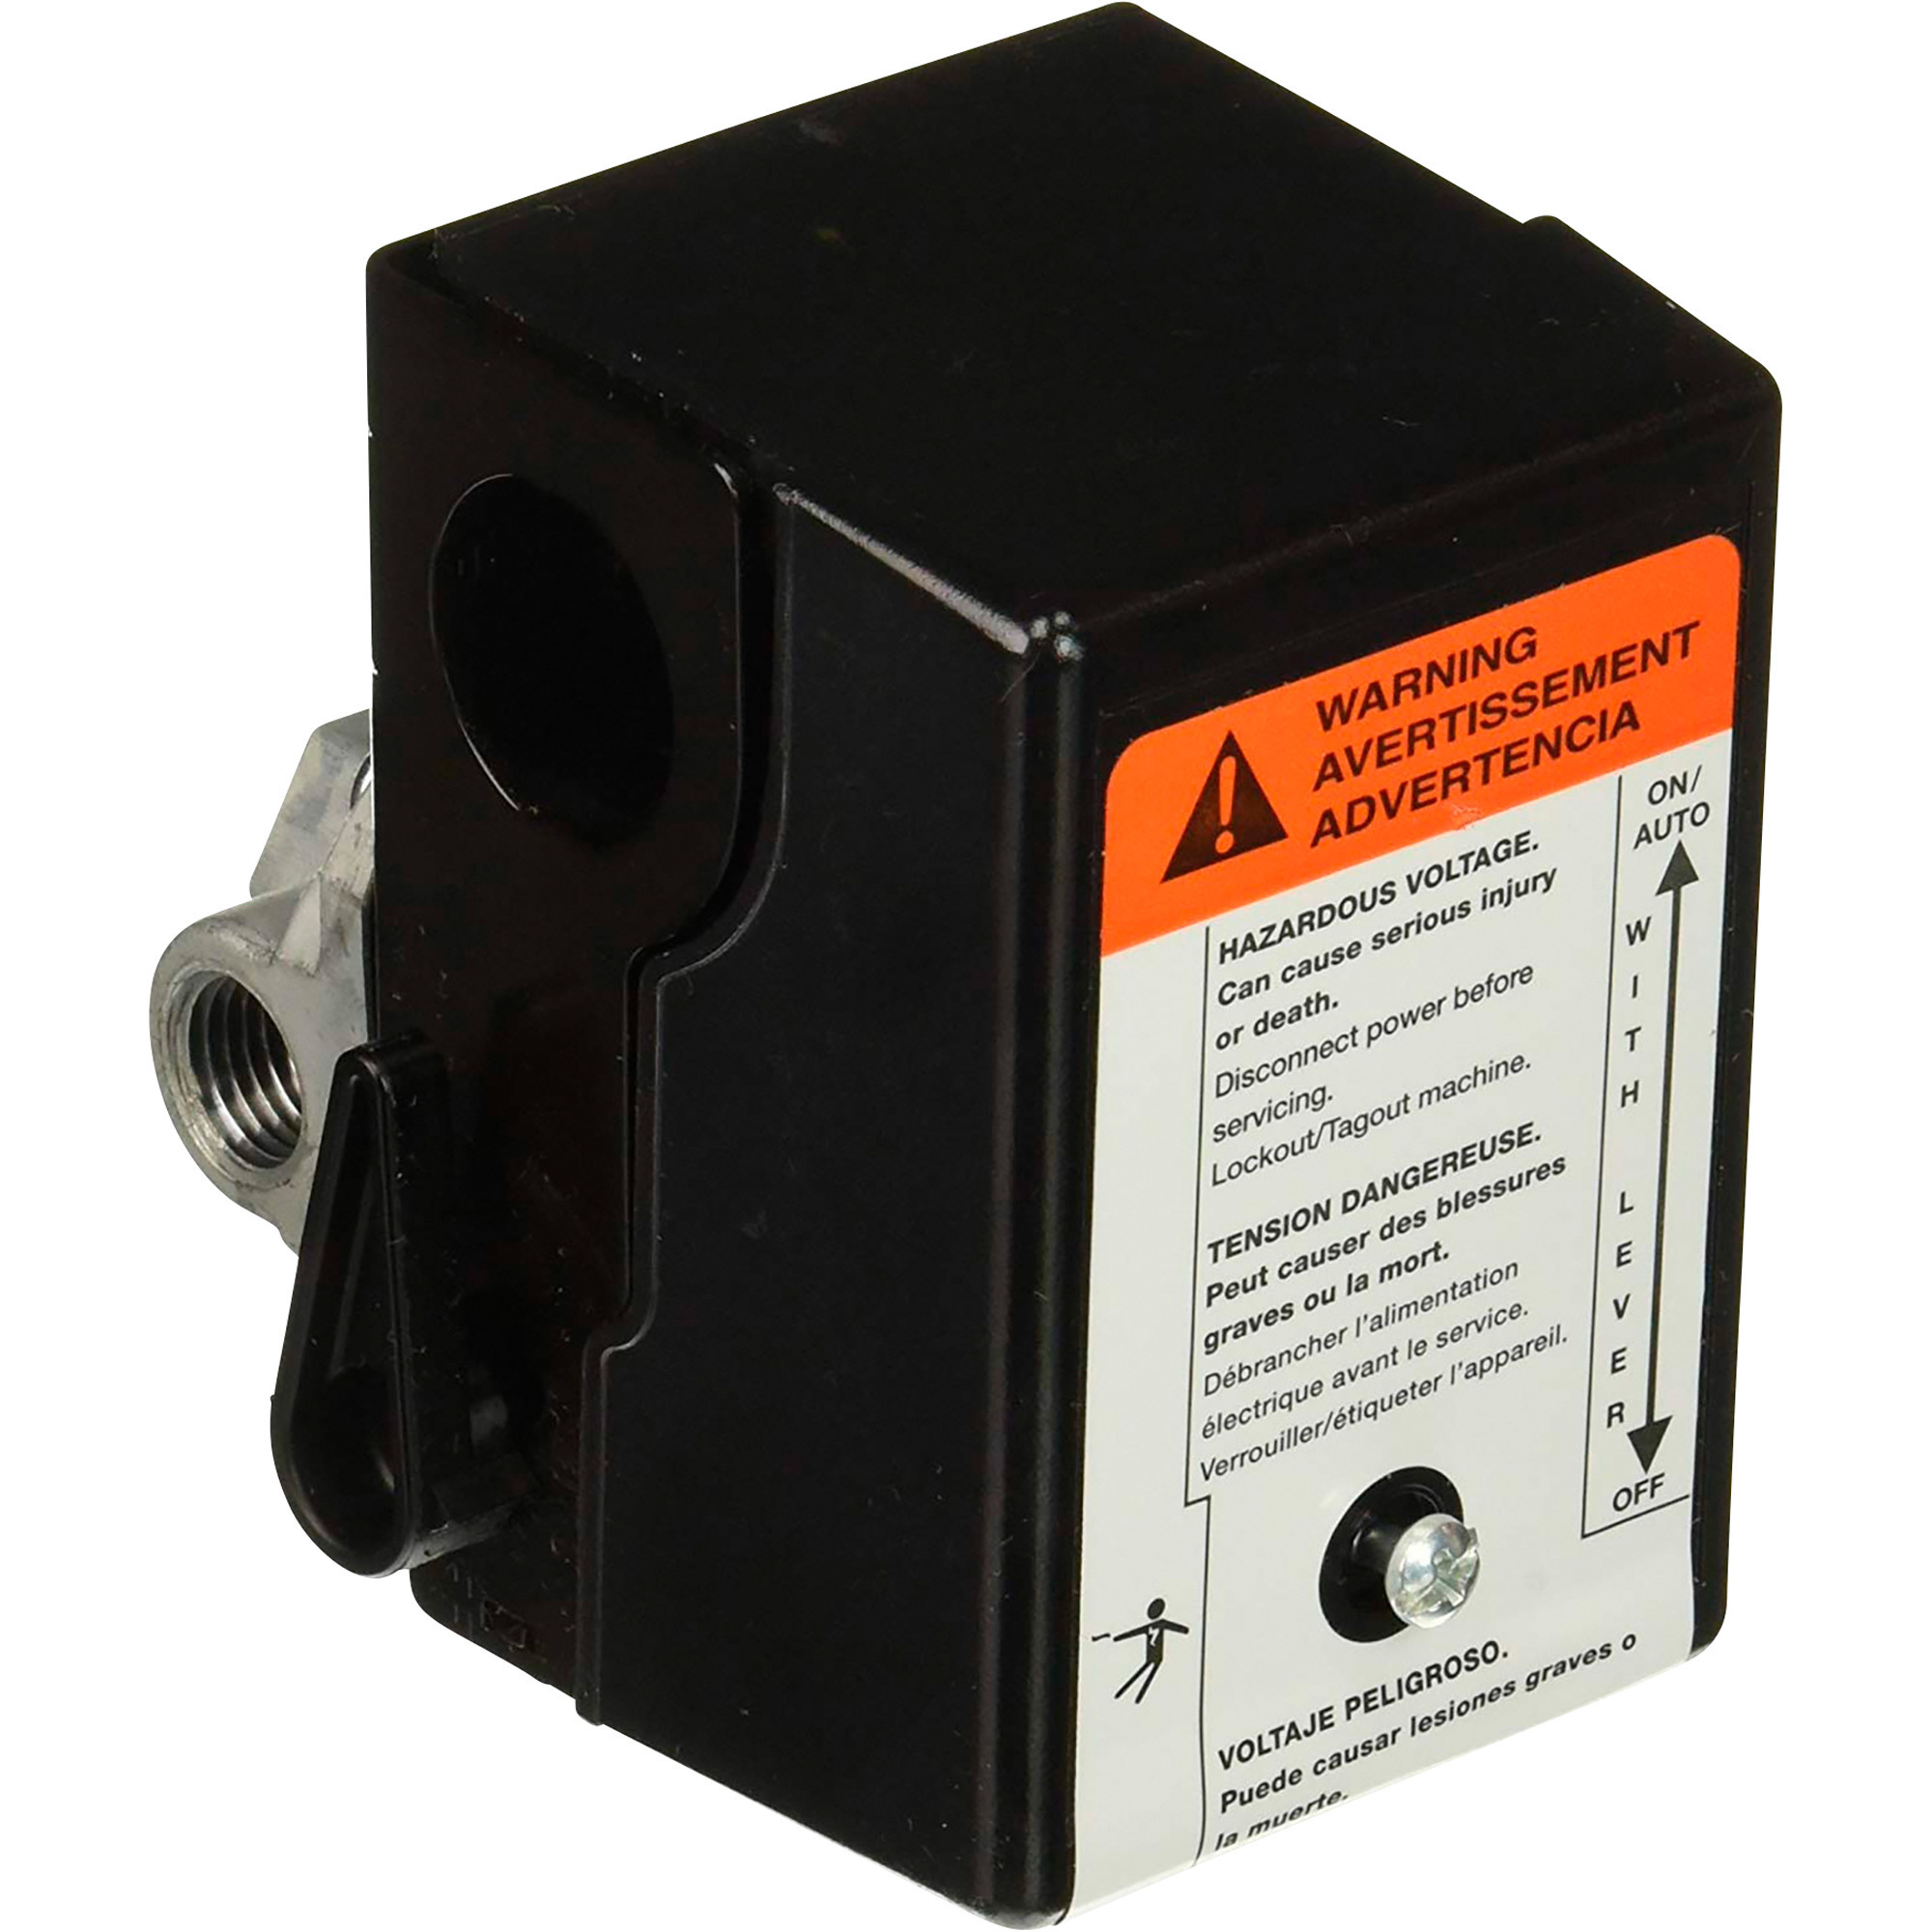 OEM Pressure Switch for Ingersoll Rand Single-Phase Air Compressor, Model 23474653-R